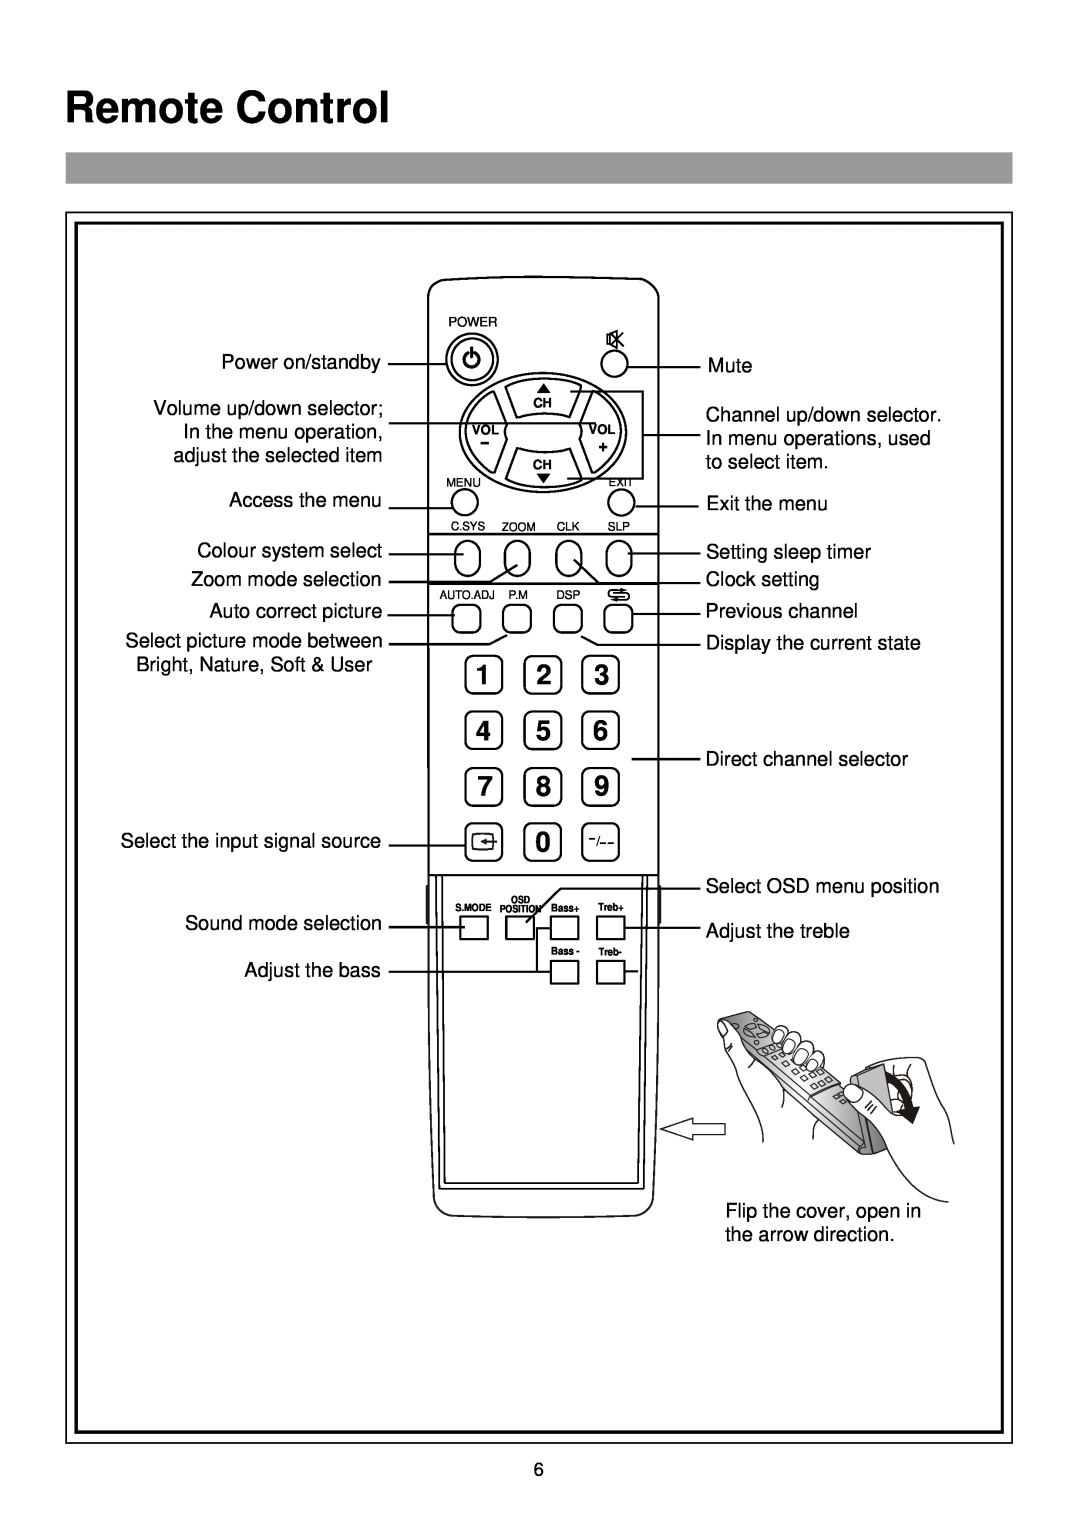 Palsonic TFTV515 owner manual Remote Control, 1 2 4 5 